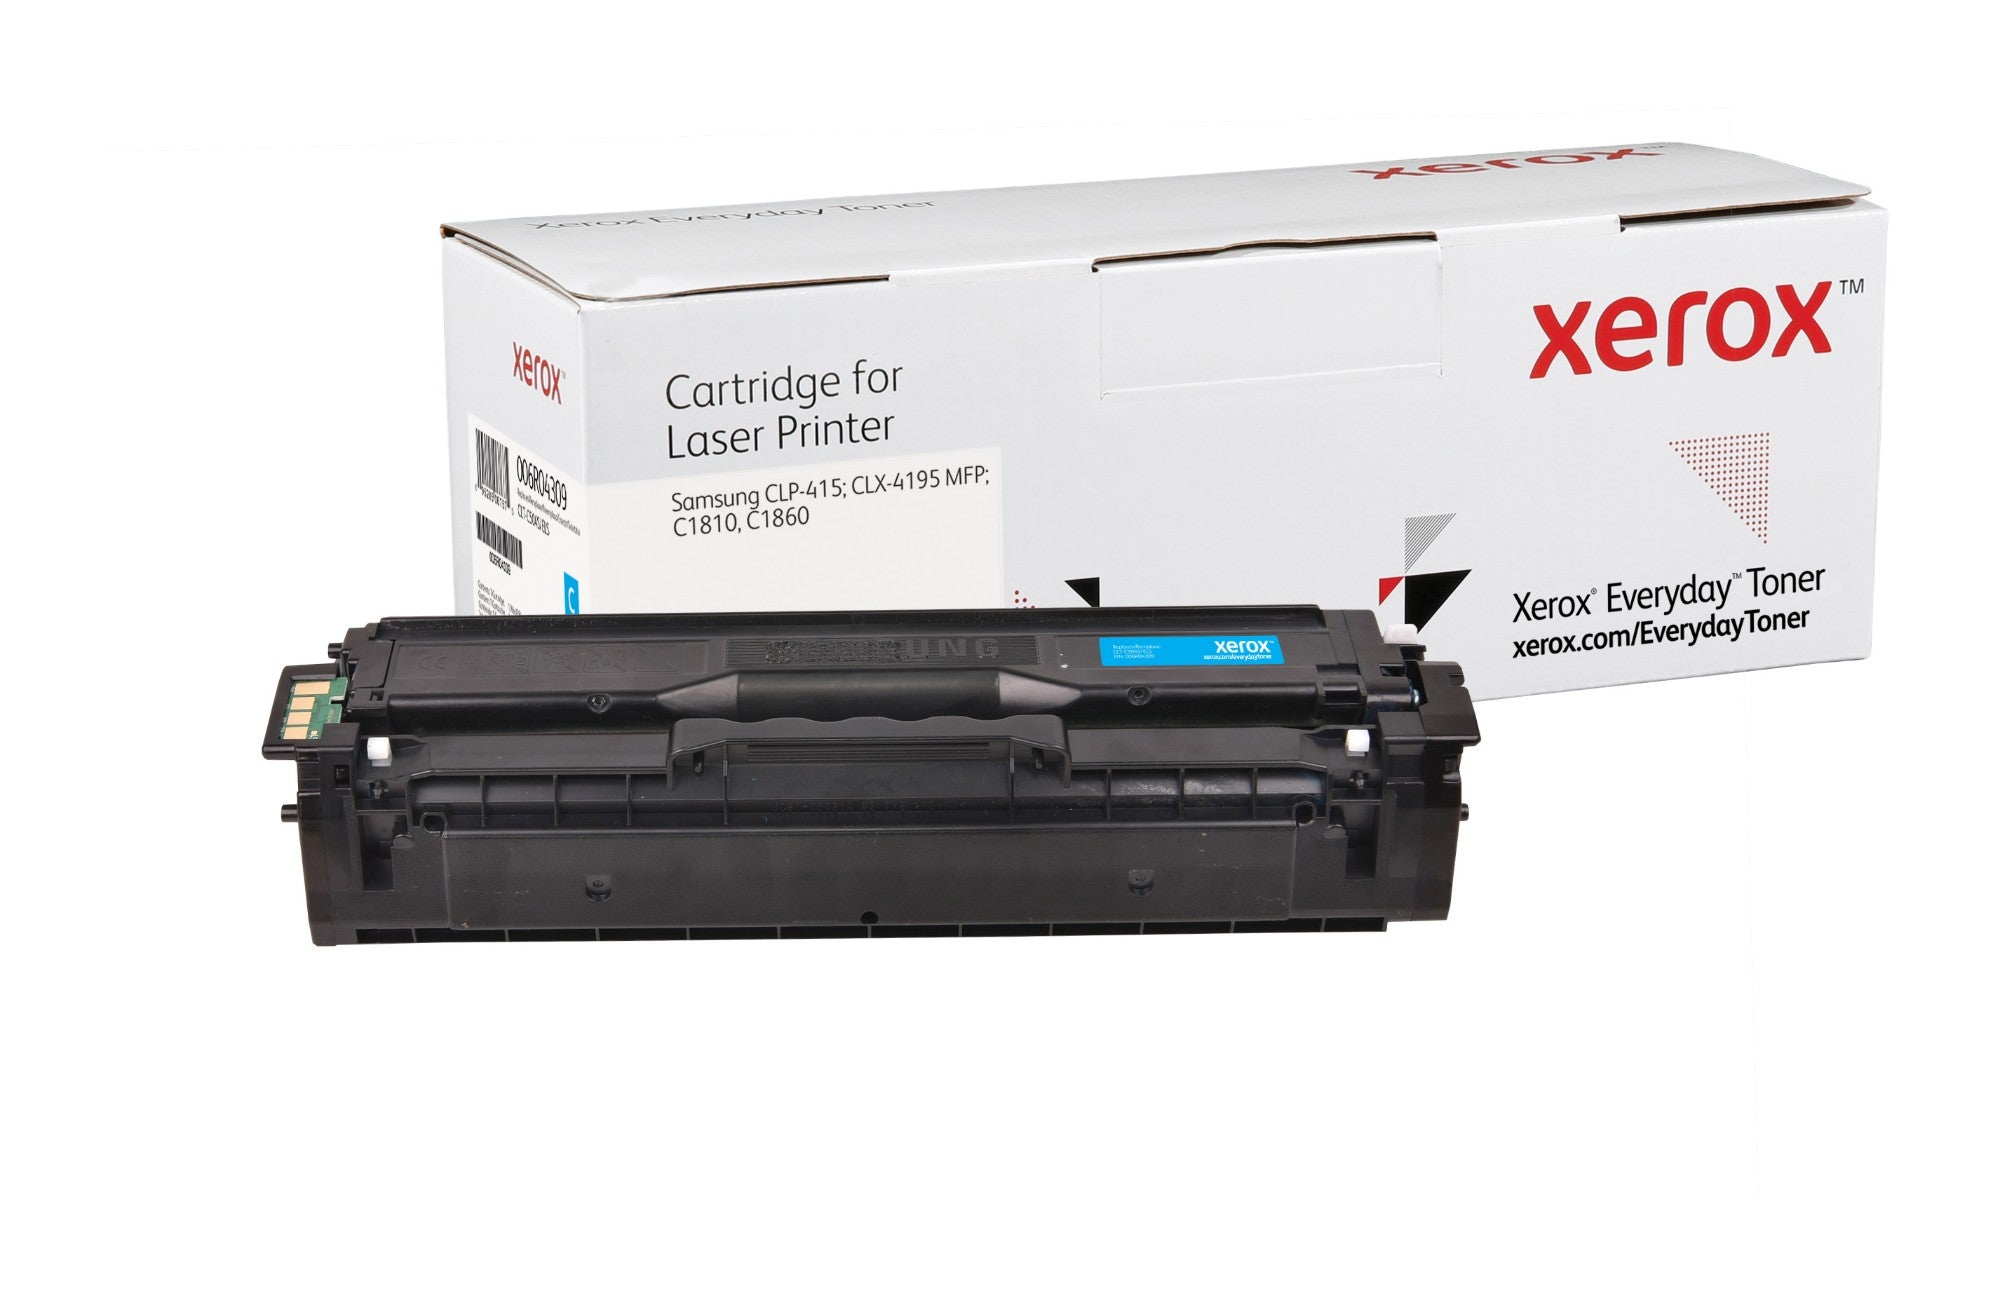 Xerox 006R04309 Toner cartridge cyan, 1.8K pages (replaces Samsung C504) for Samsung CLP 415